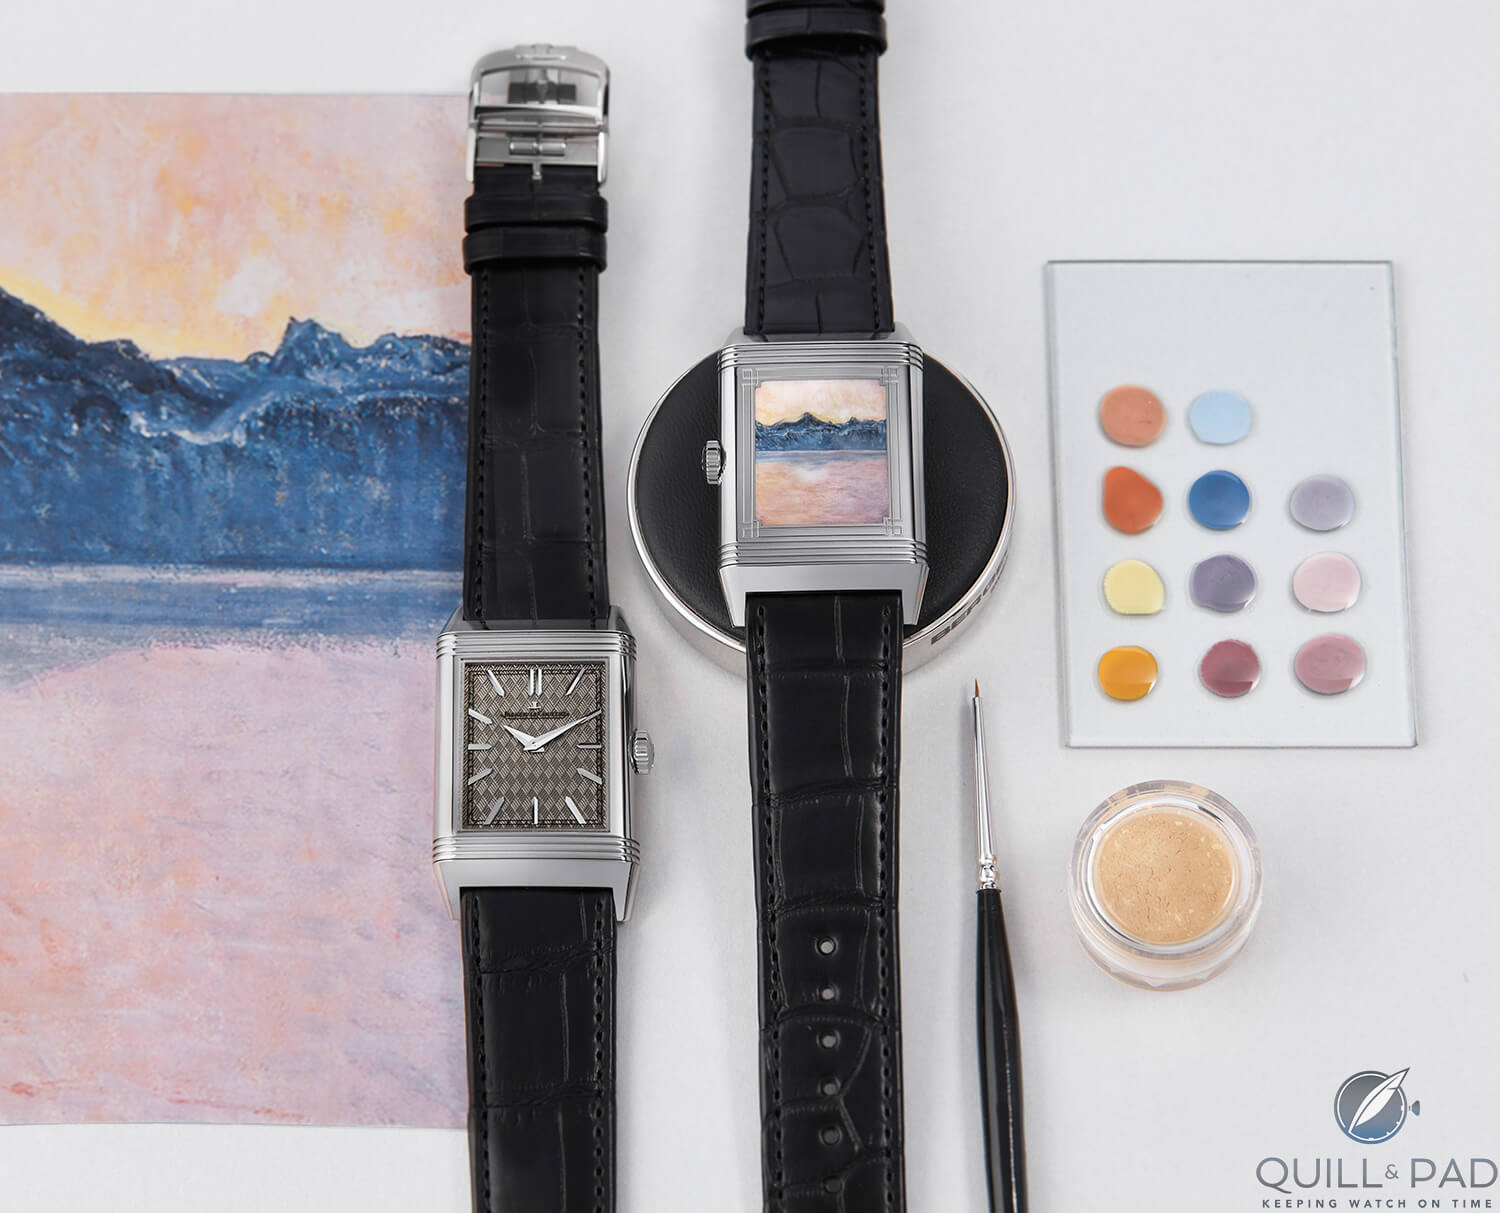 The front and back of Jaeger-LeCoultre's Reverso Enamel Tribute to Ferdinand Hodler 'Lake Geneva with Mont Blanc in the Morning Light' edition